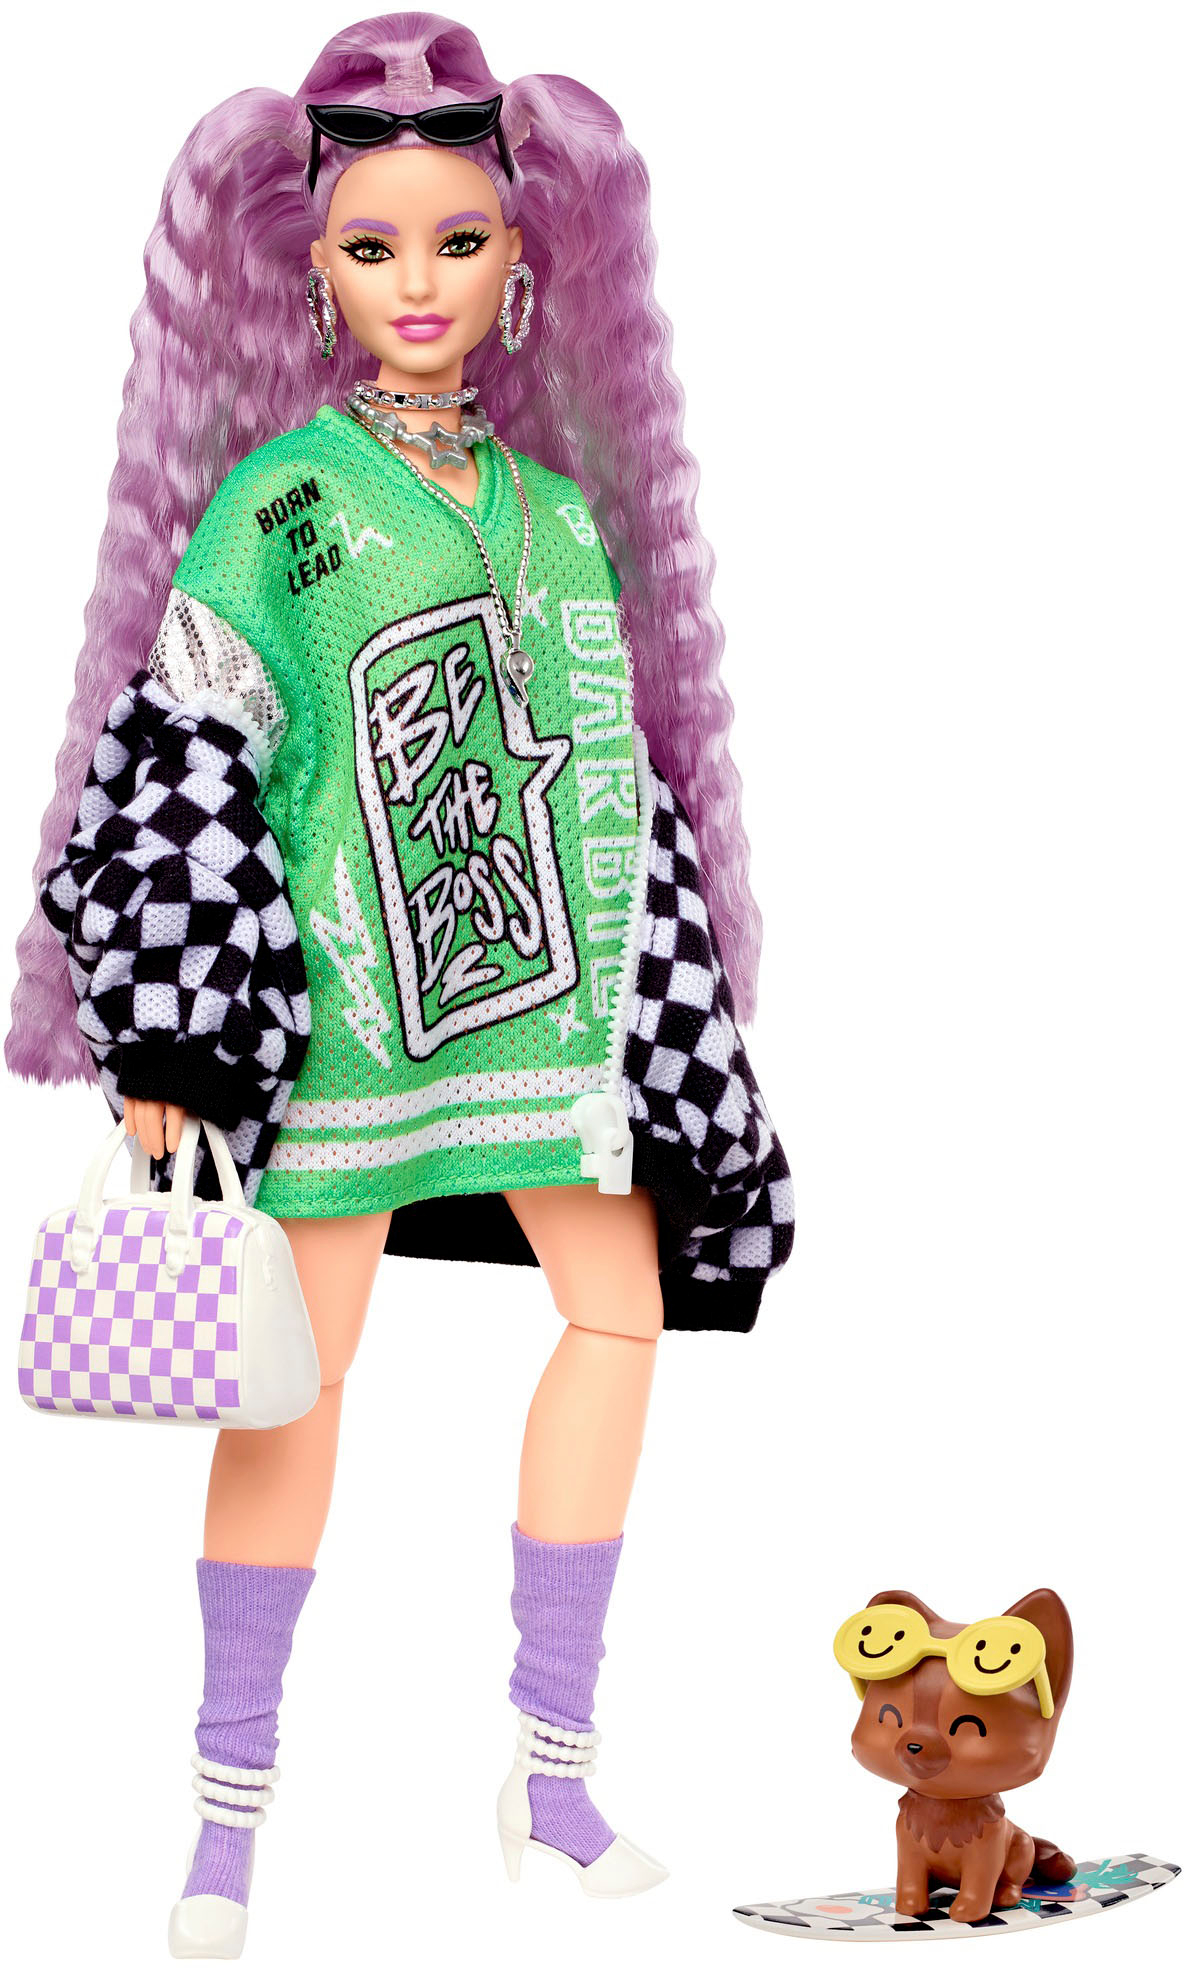 norte calcular Perspectiva Barbie Extra #18, 8.5" Fashion Doll HHN10 - Best Buy